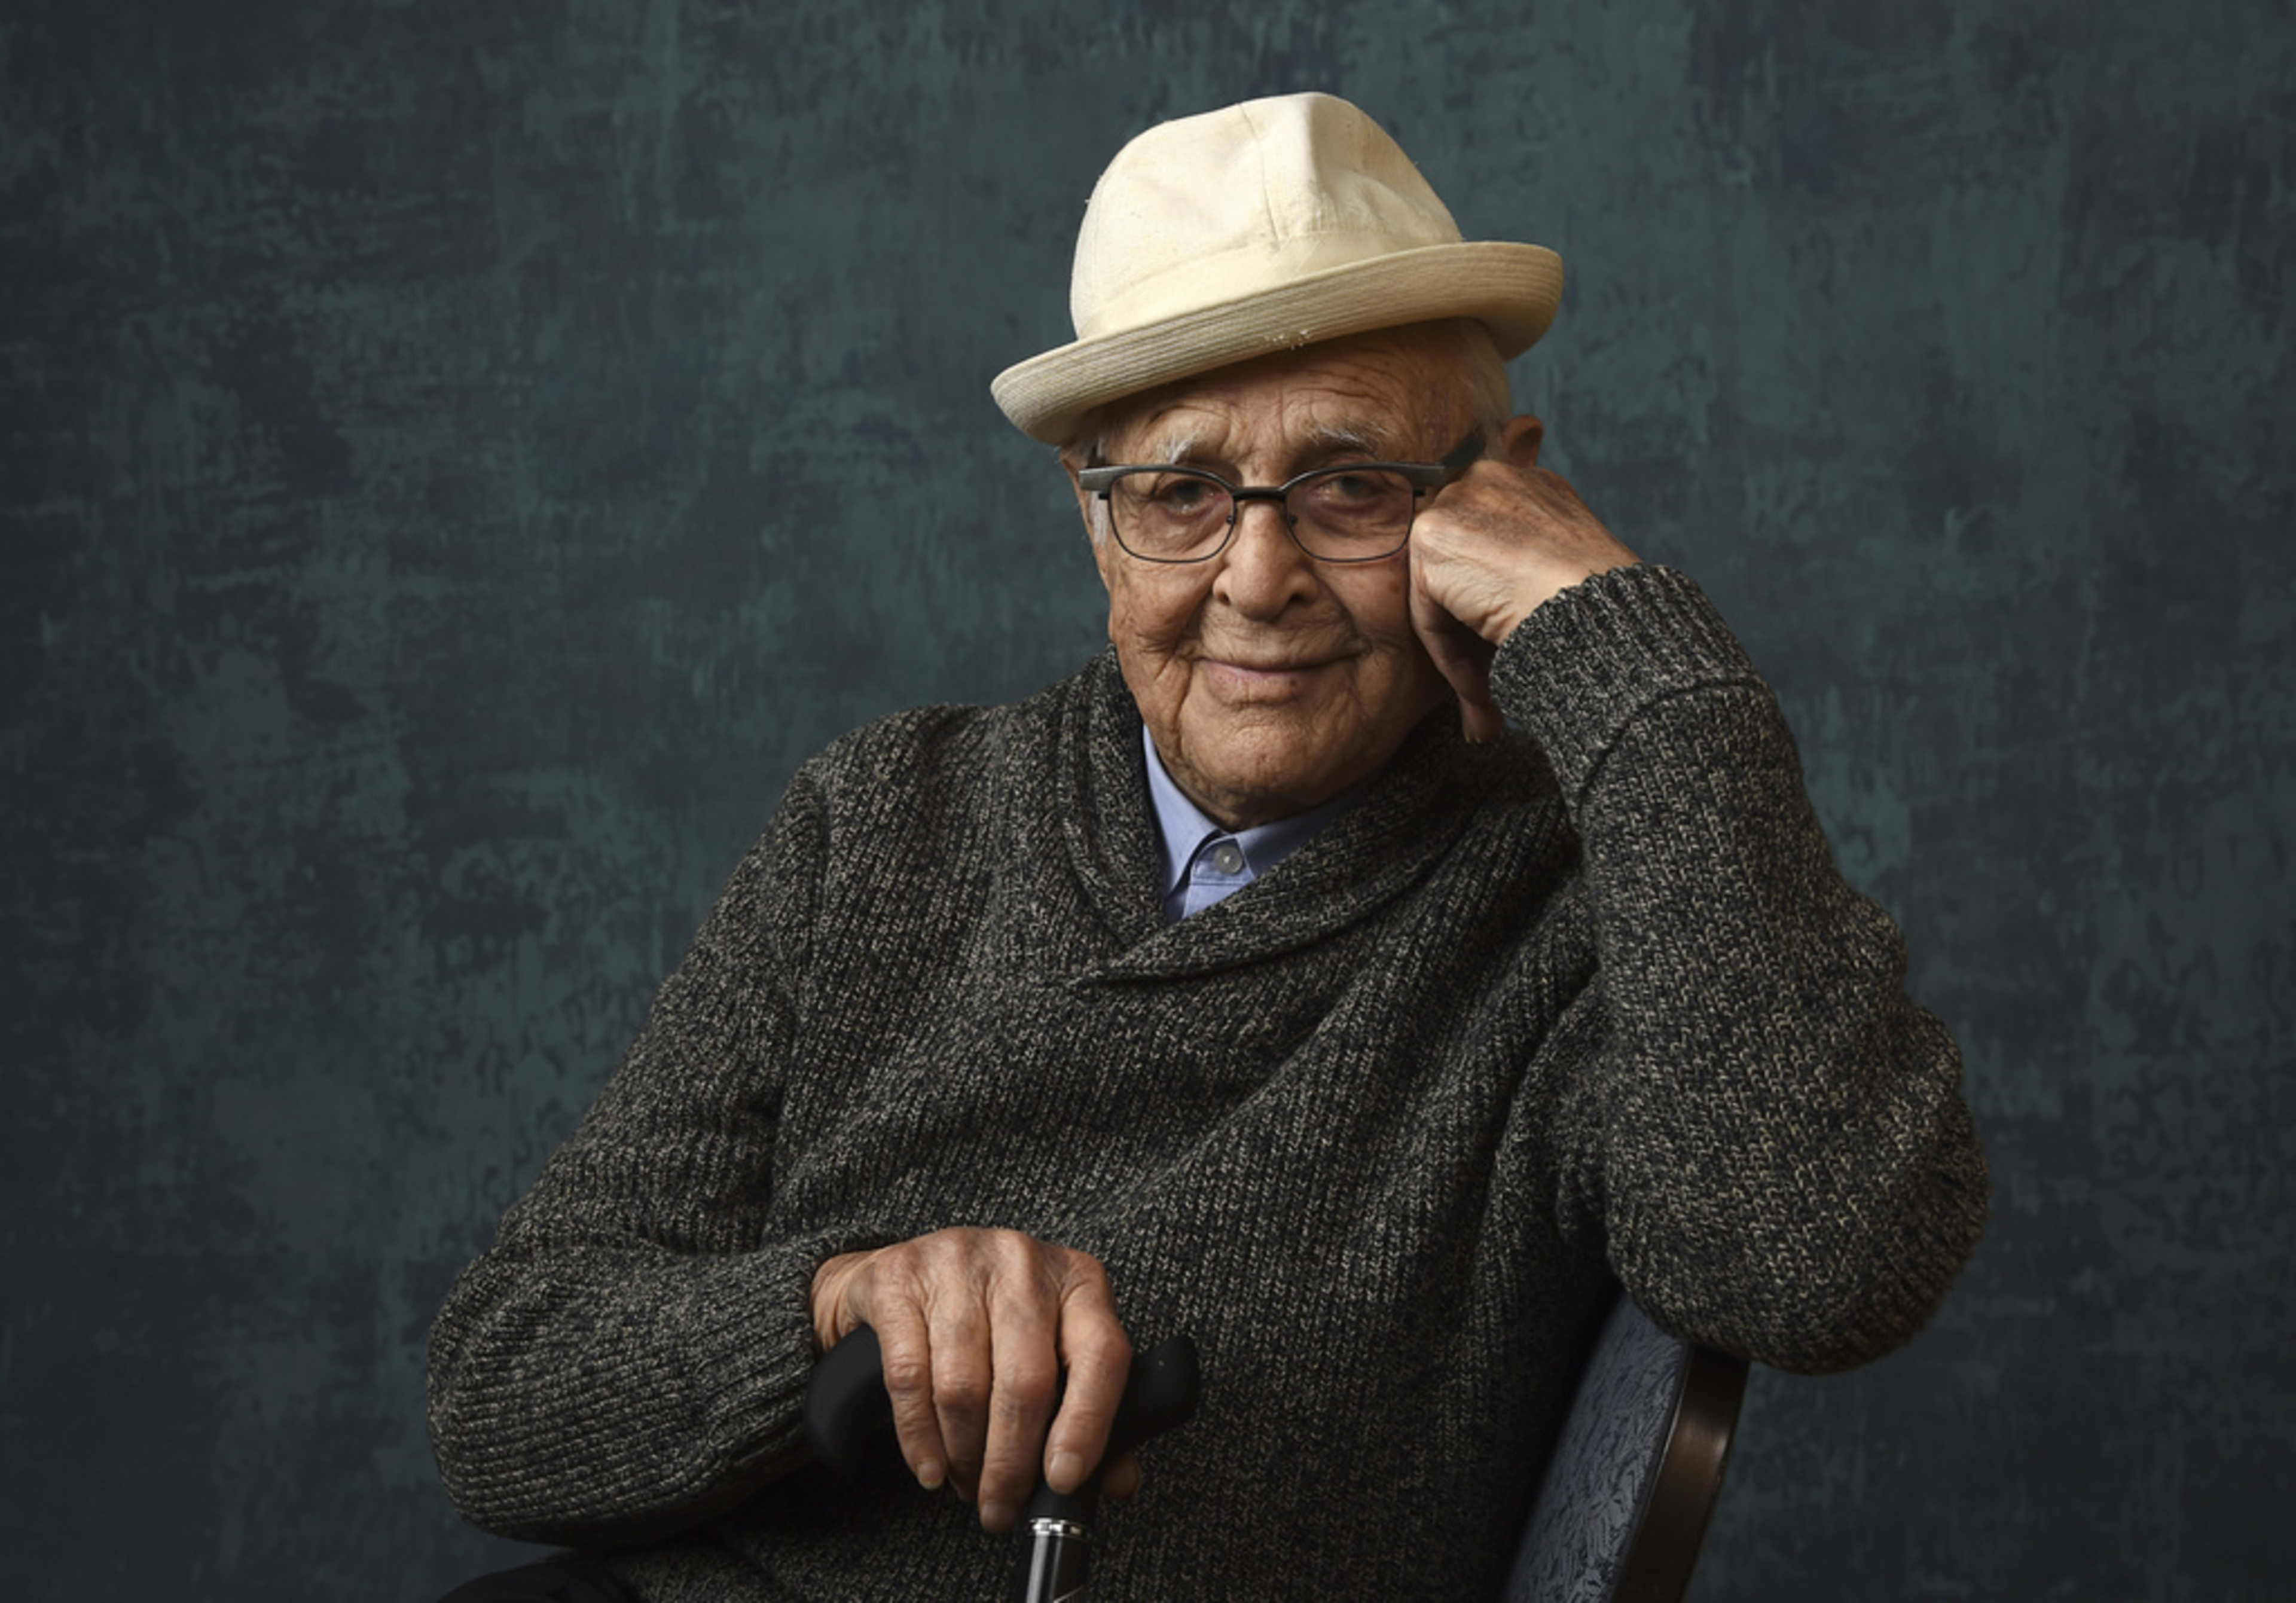 TV pioneer Norman Lear, producer of ‘All in the Family’ and many spinoffs, is dead at 101